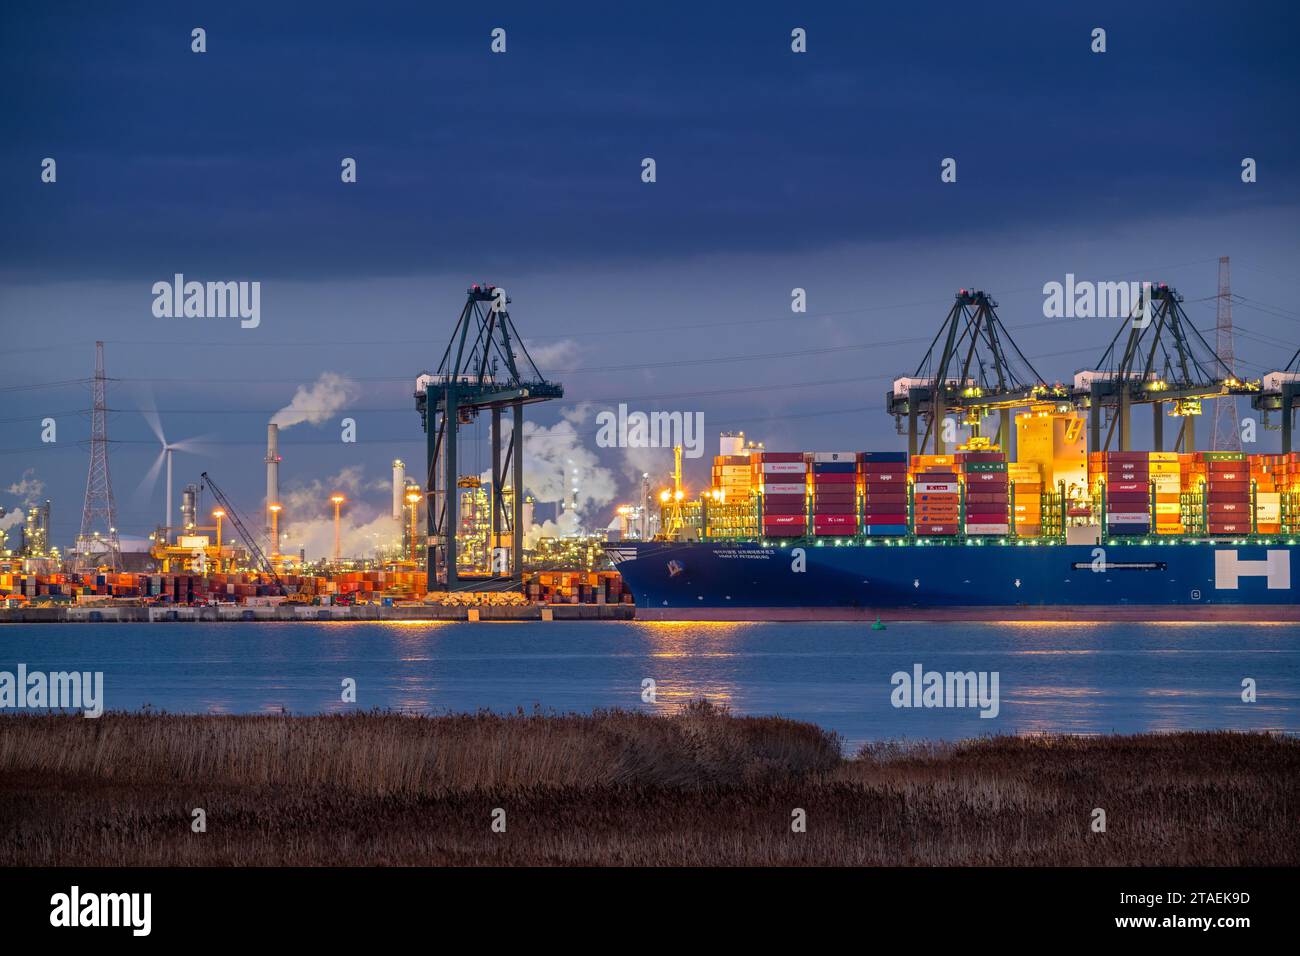 Gantry cranes and stacked containers on container ship docked at container terminal in the port of Antwerp seaport / harbour, Flanders, Belgium Stock Photo